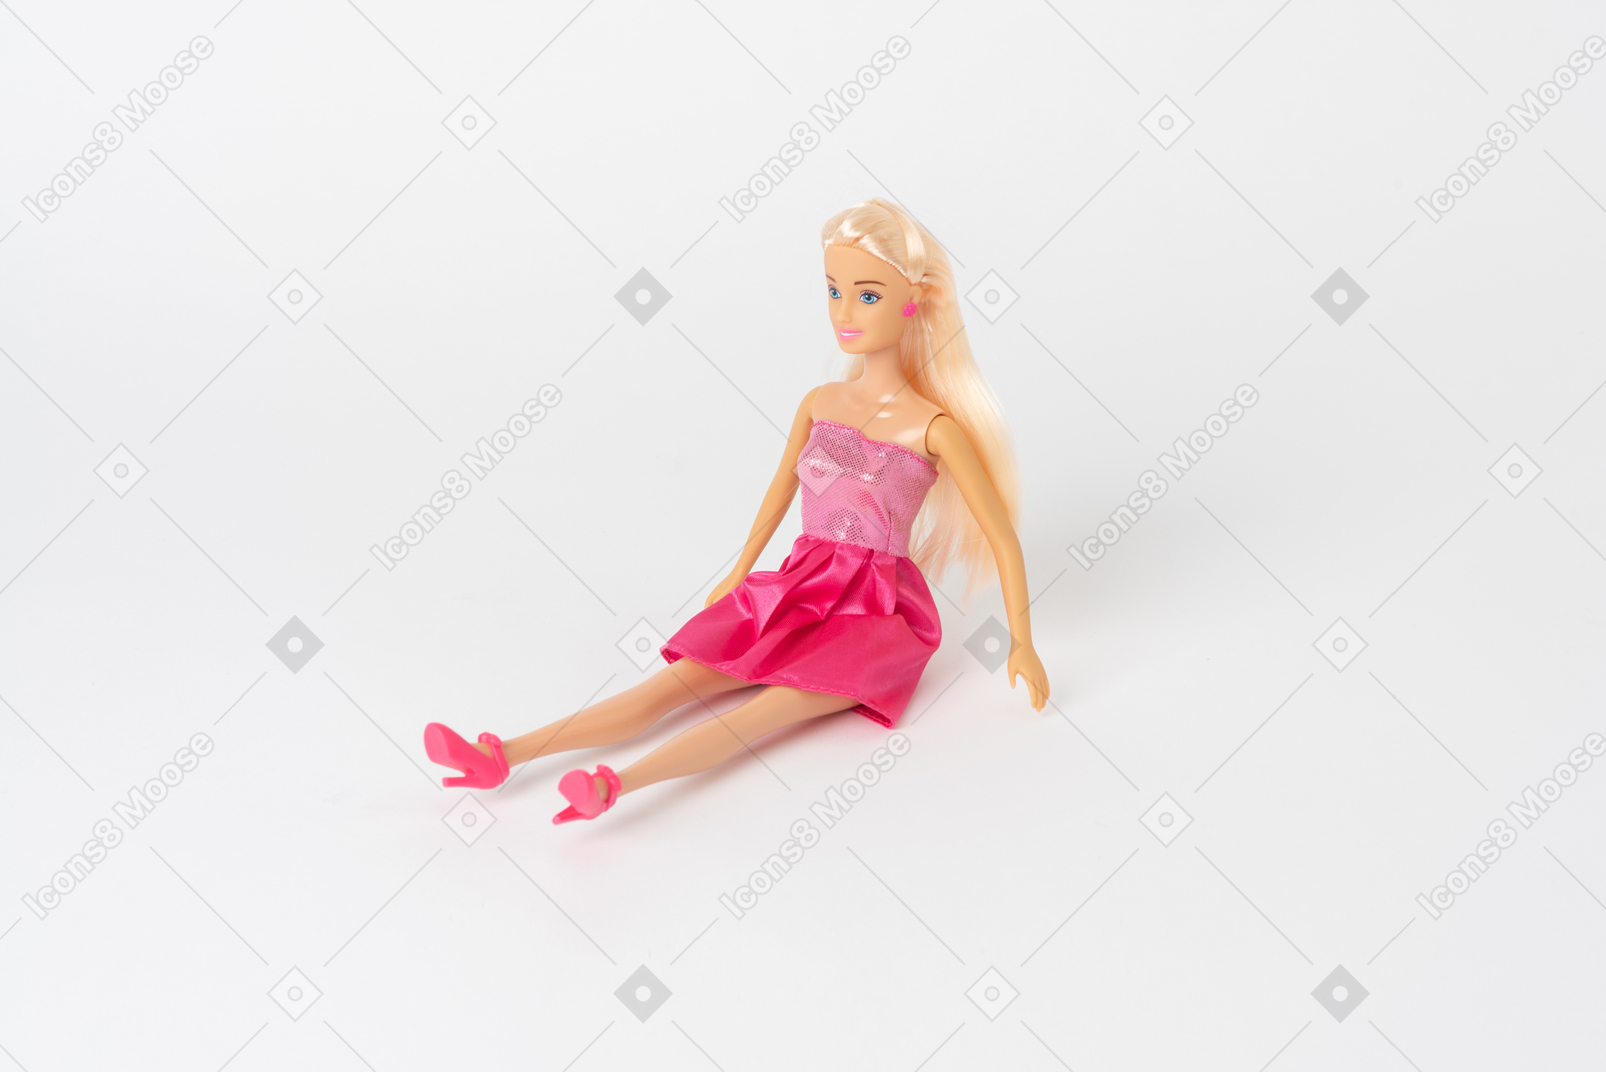 A beautiful barbie doll in a shiny pink dress and pink high heels sitting isolated against a plain white background